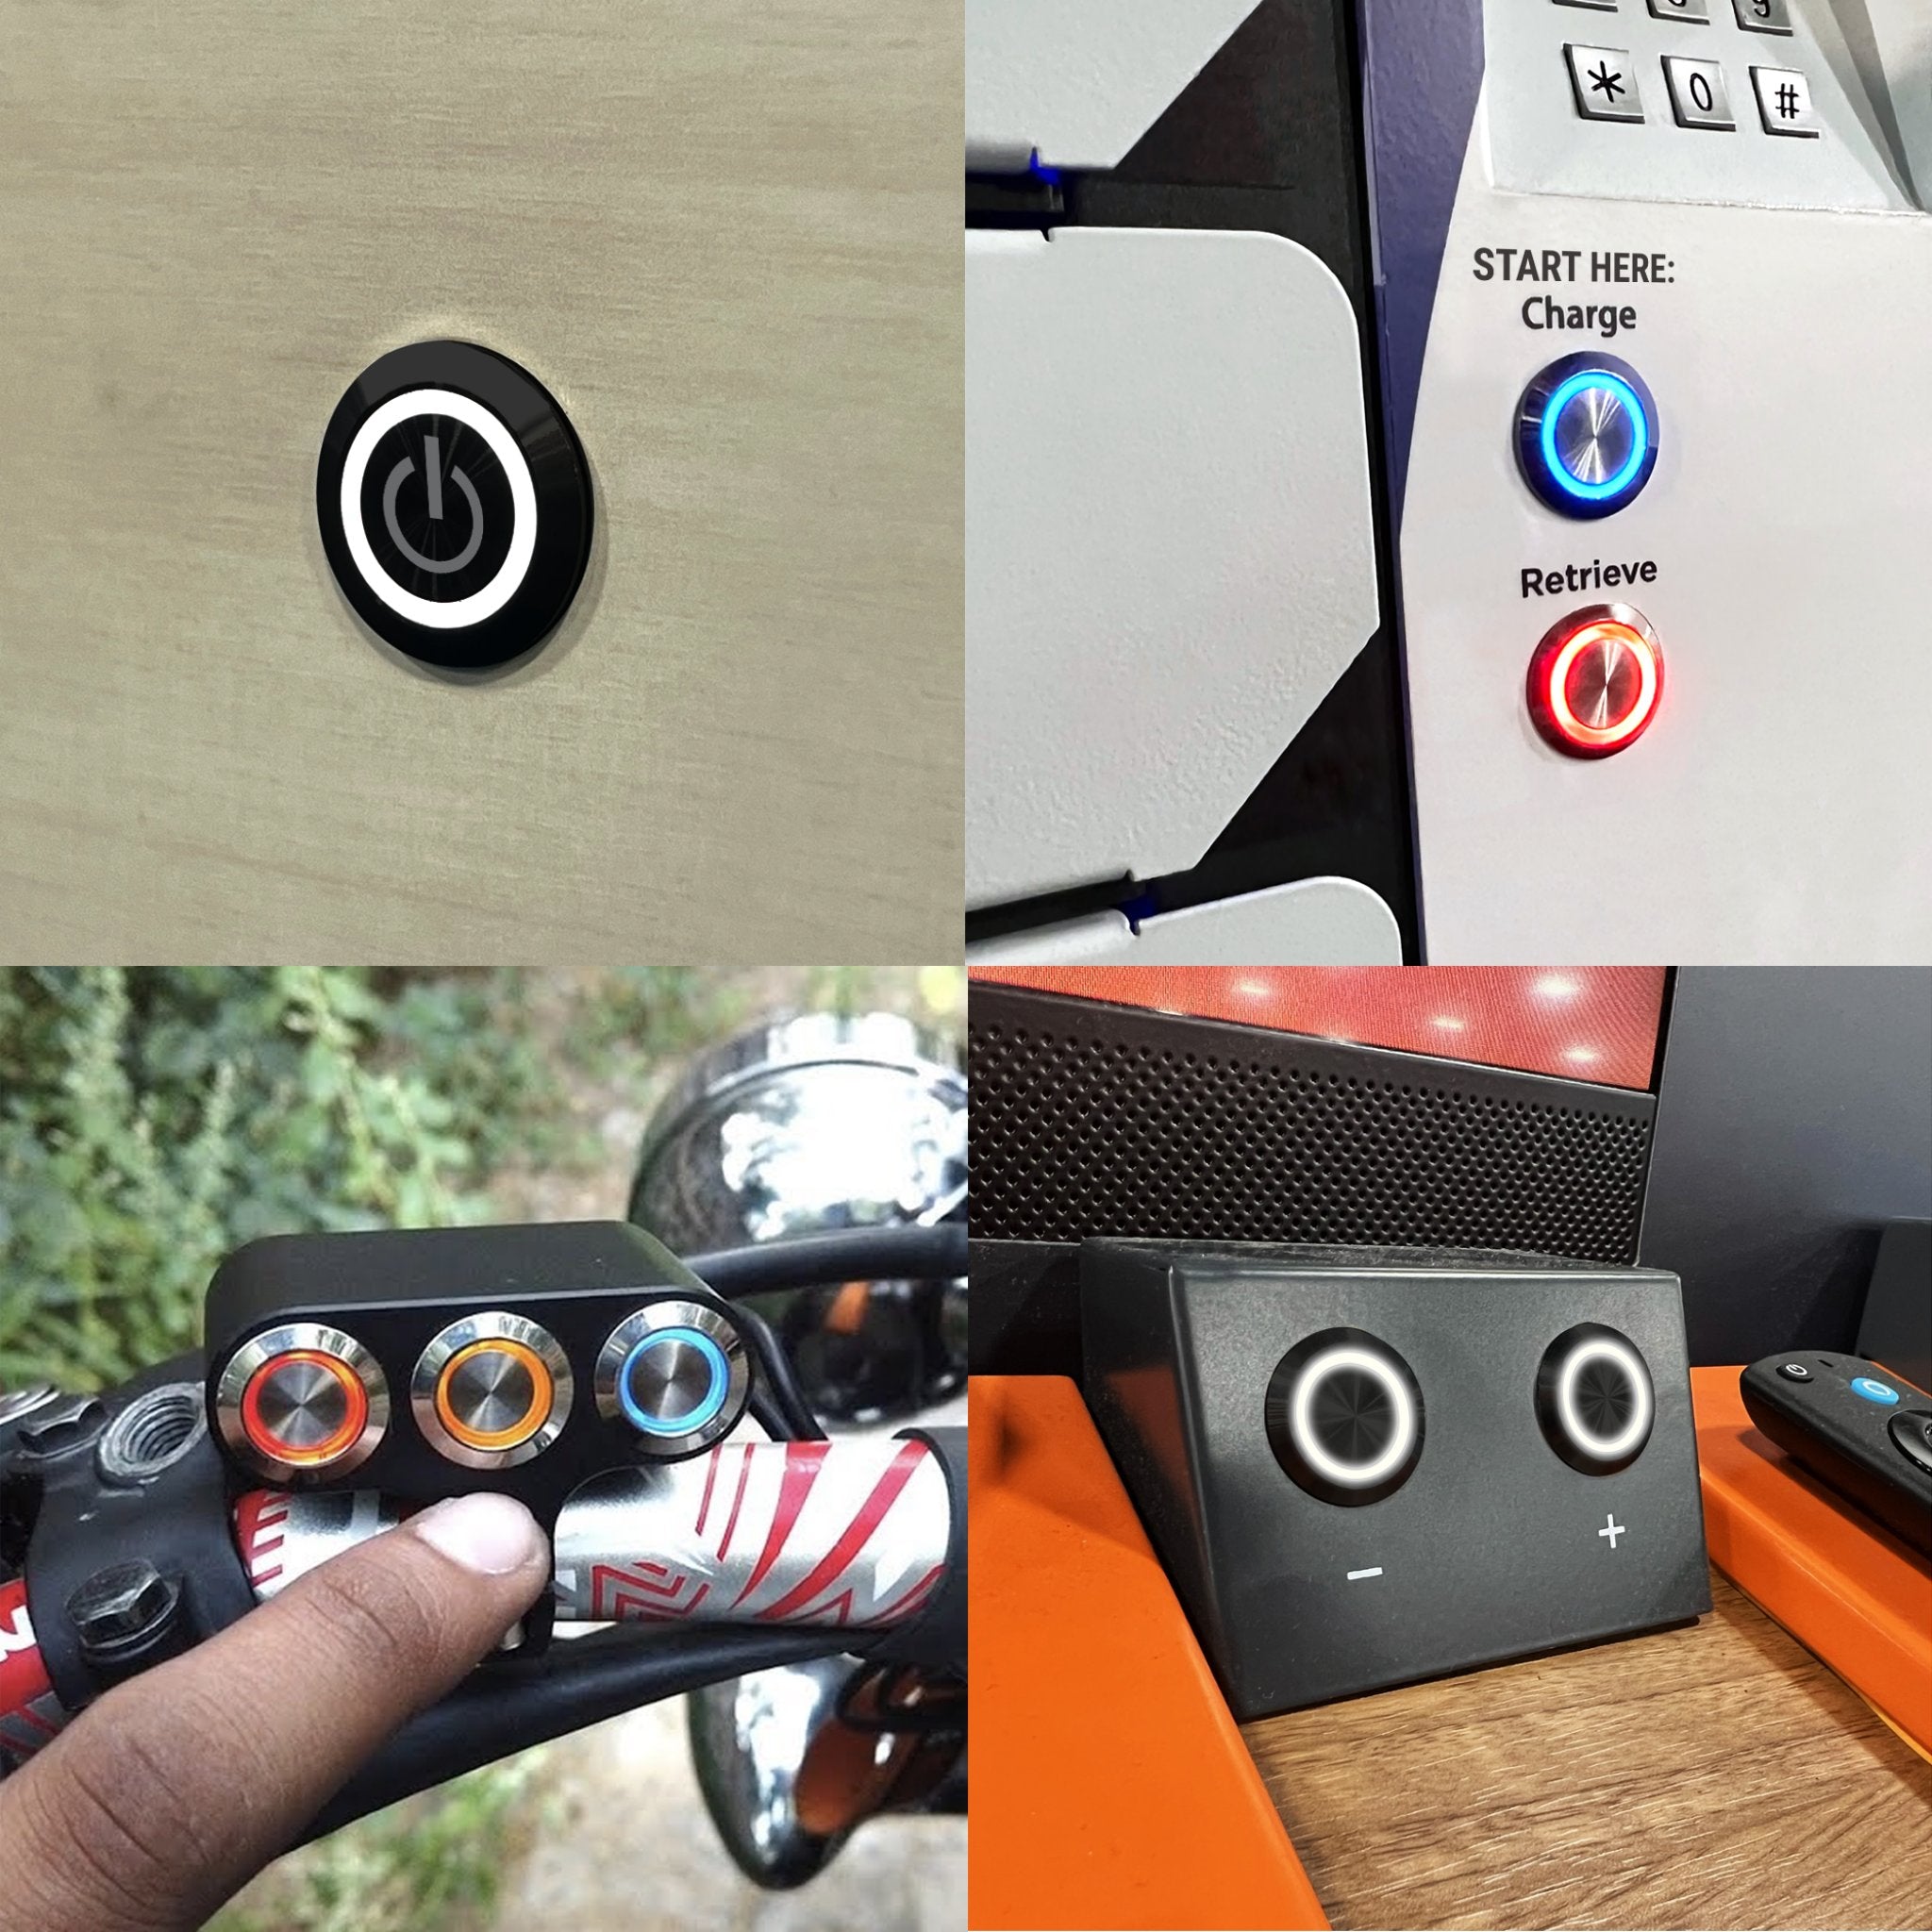 Black Anodized Metal Push Buttons